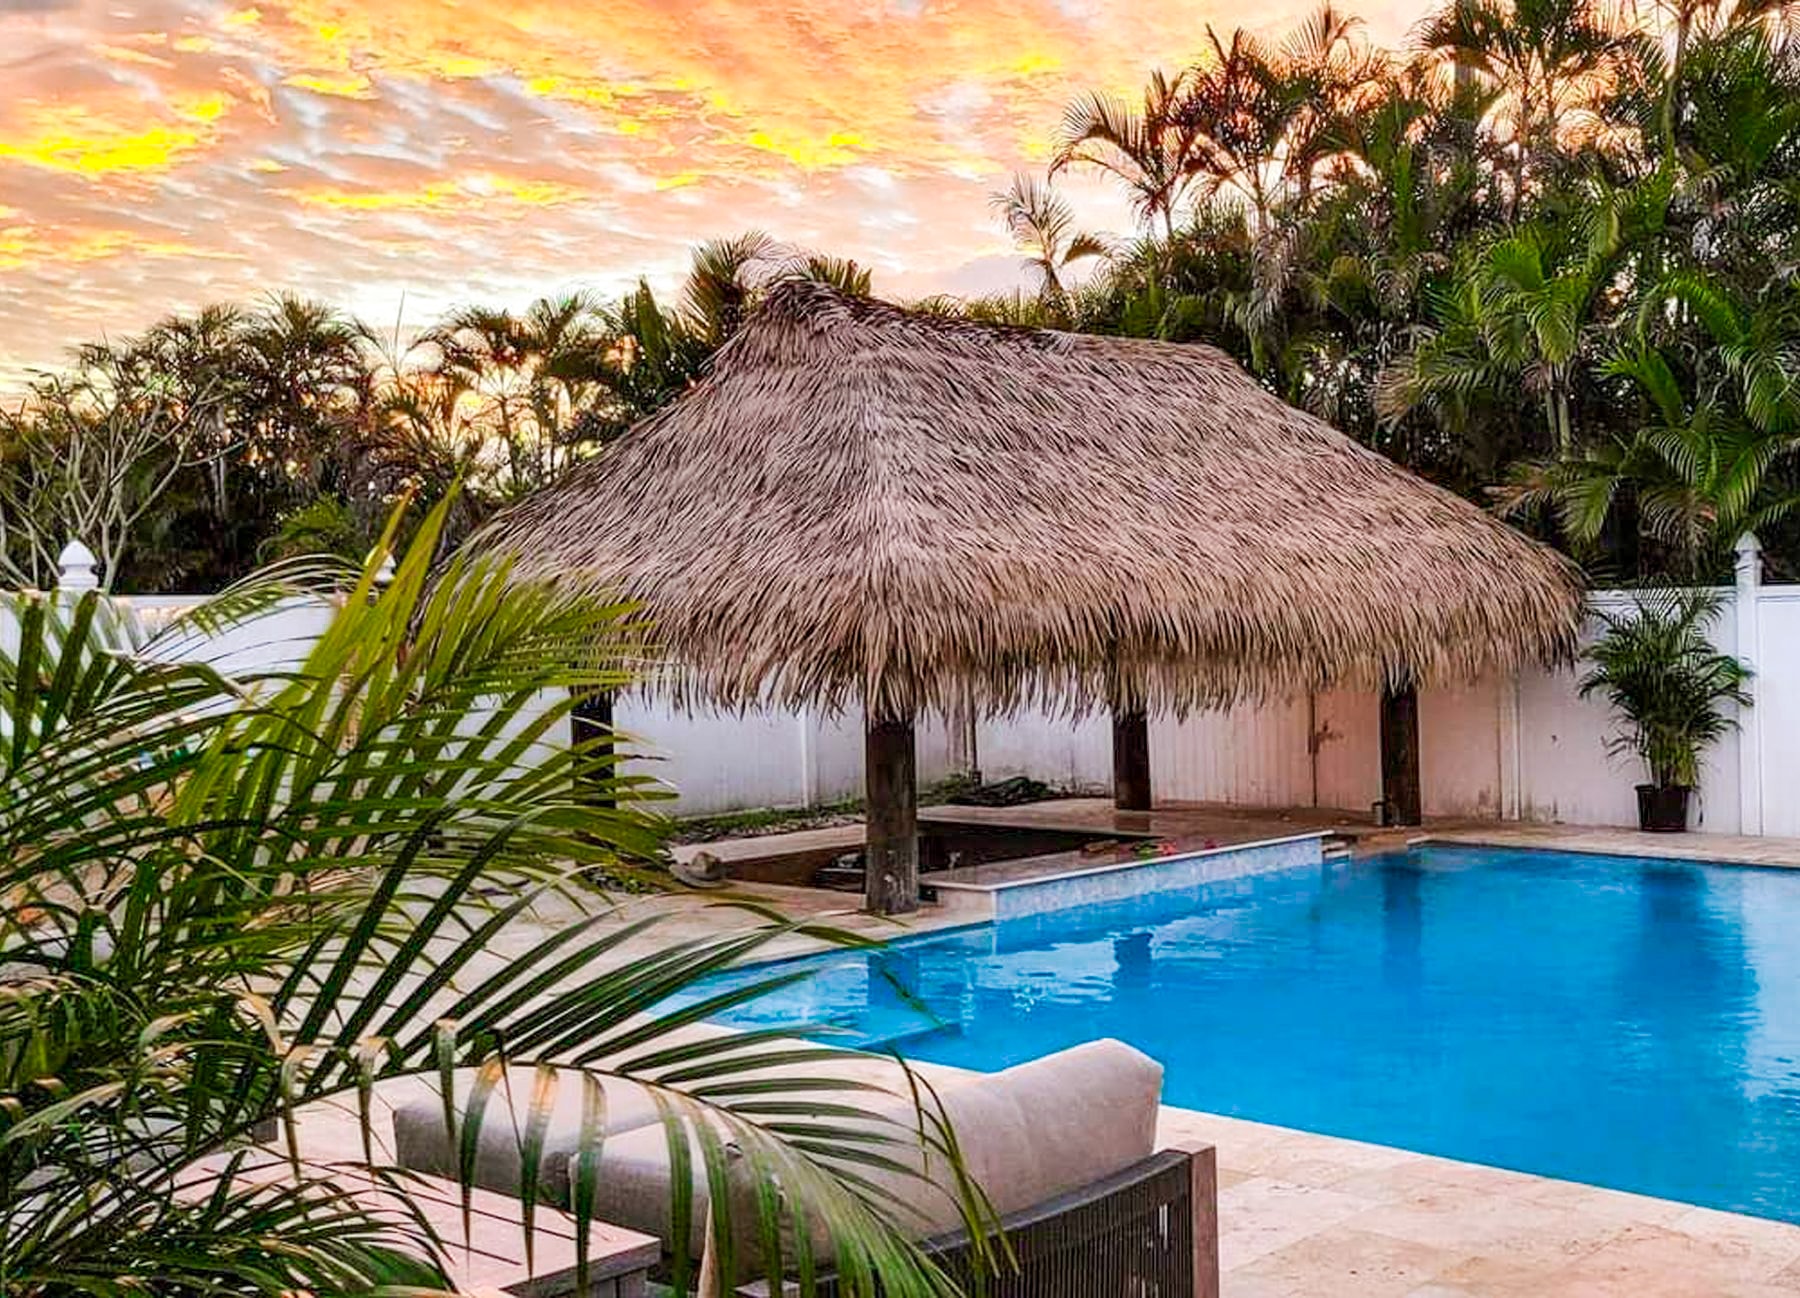 Synthetic thatch palapa next to a pool under a colorful sunset.